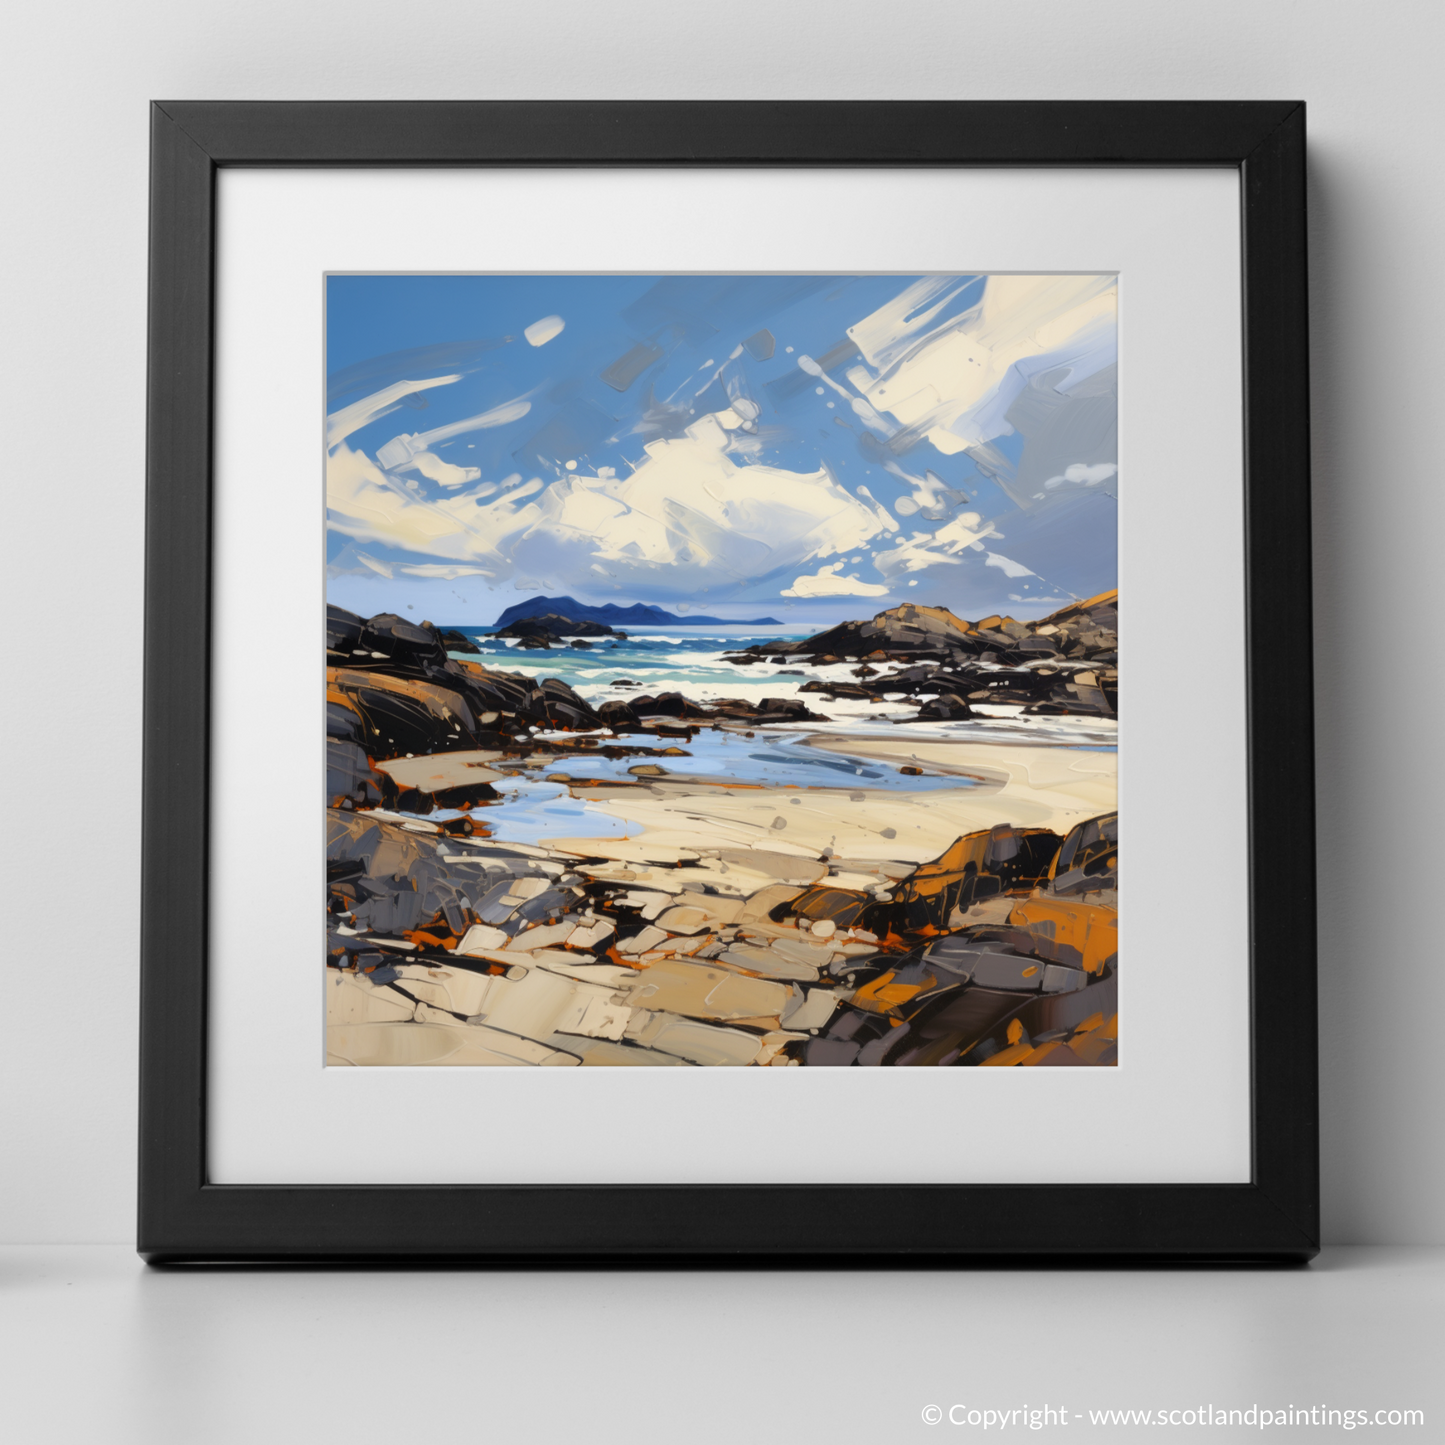 Art Print of Isle of Harris, Outer Hebrides with a black frame